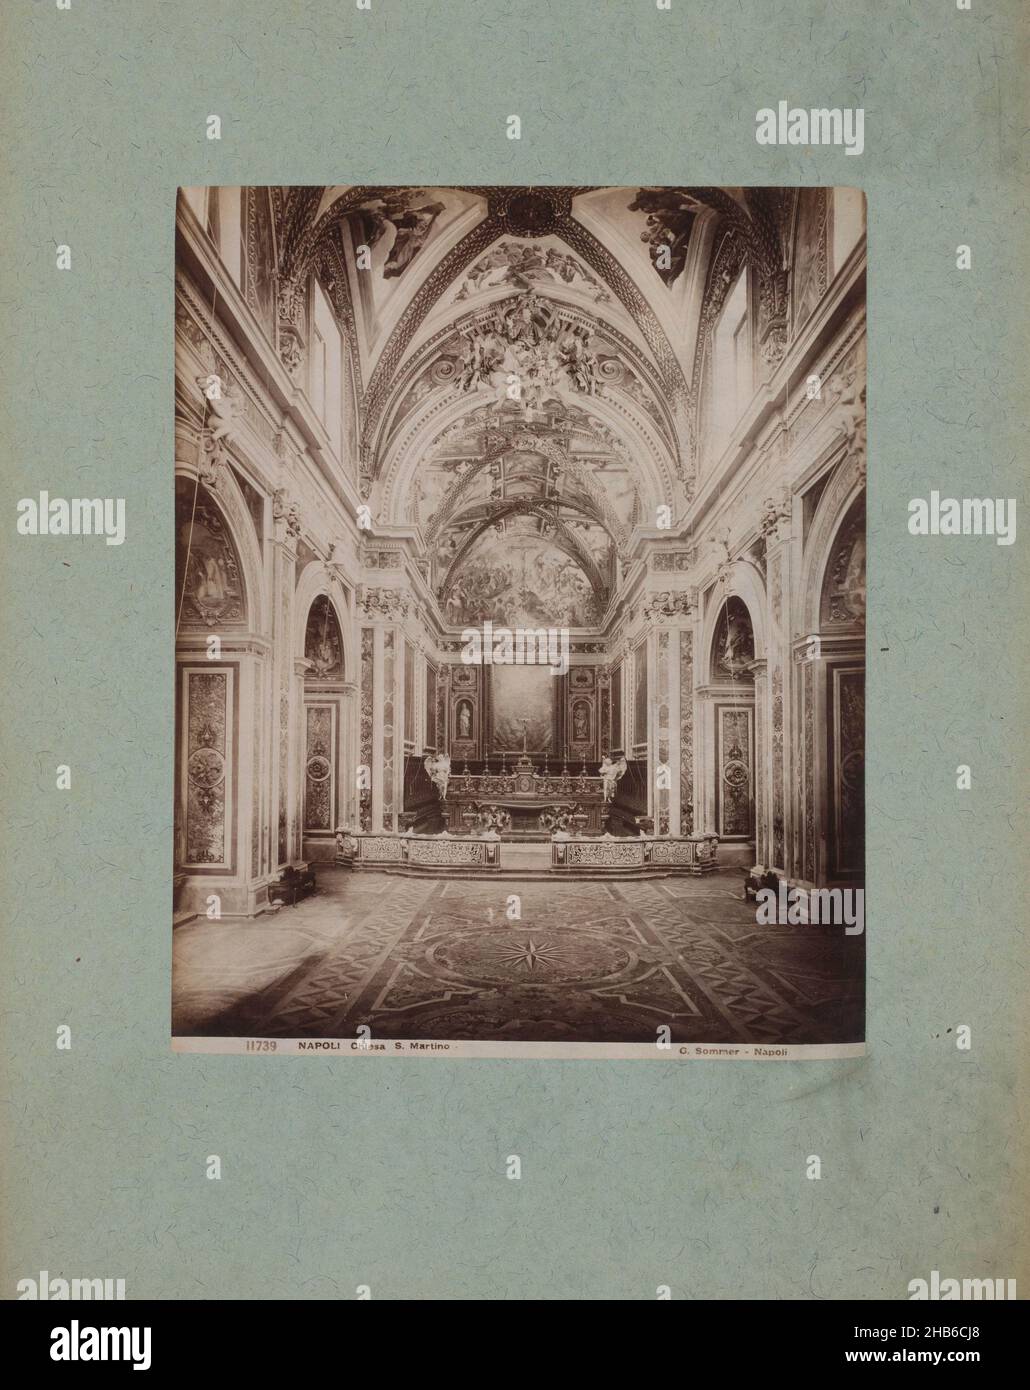 Interior of the Carthusian Monastery of St. Martin in Naples, Italy, Chiesa S. Martino (title on object), Napoli (series title on object), Giorgio Sommer (mentioned on object), Naples, 1857 - 1914, cardboard, paper, albumen print, height 413 mm × width 318 mm Stock Photo